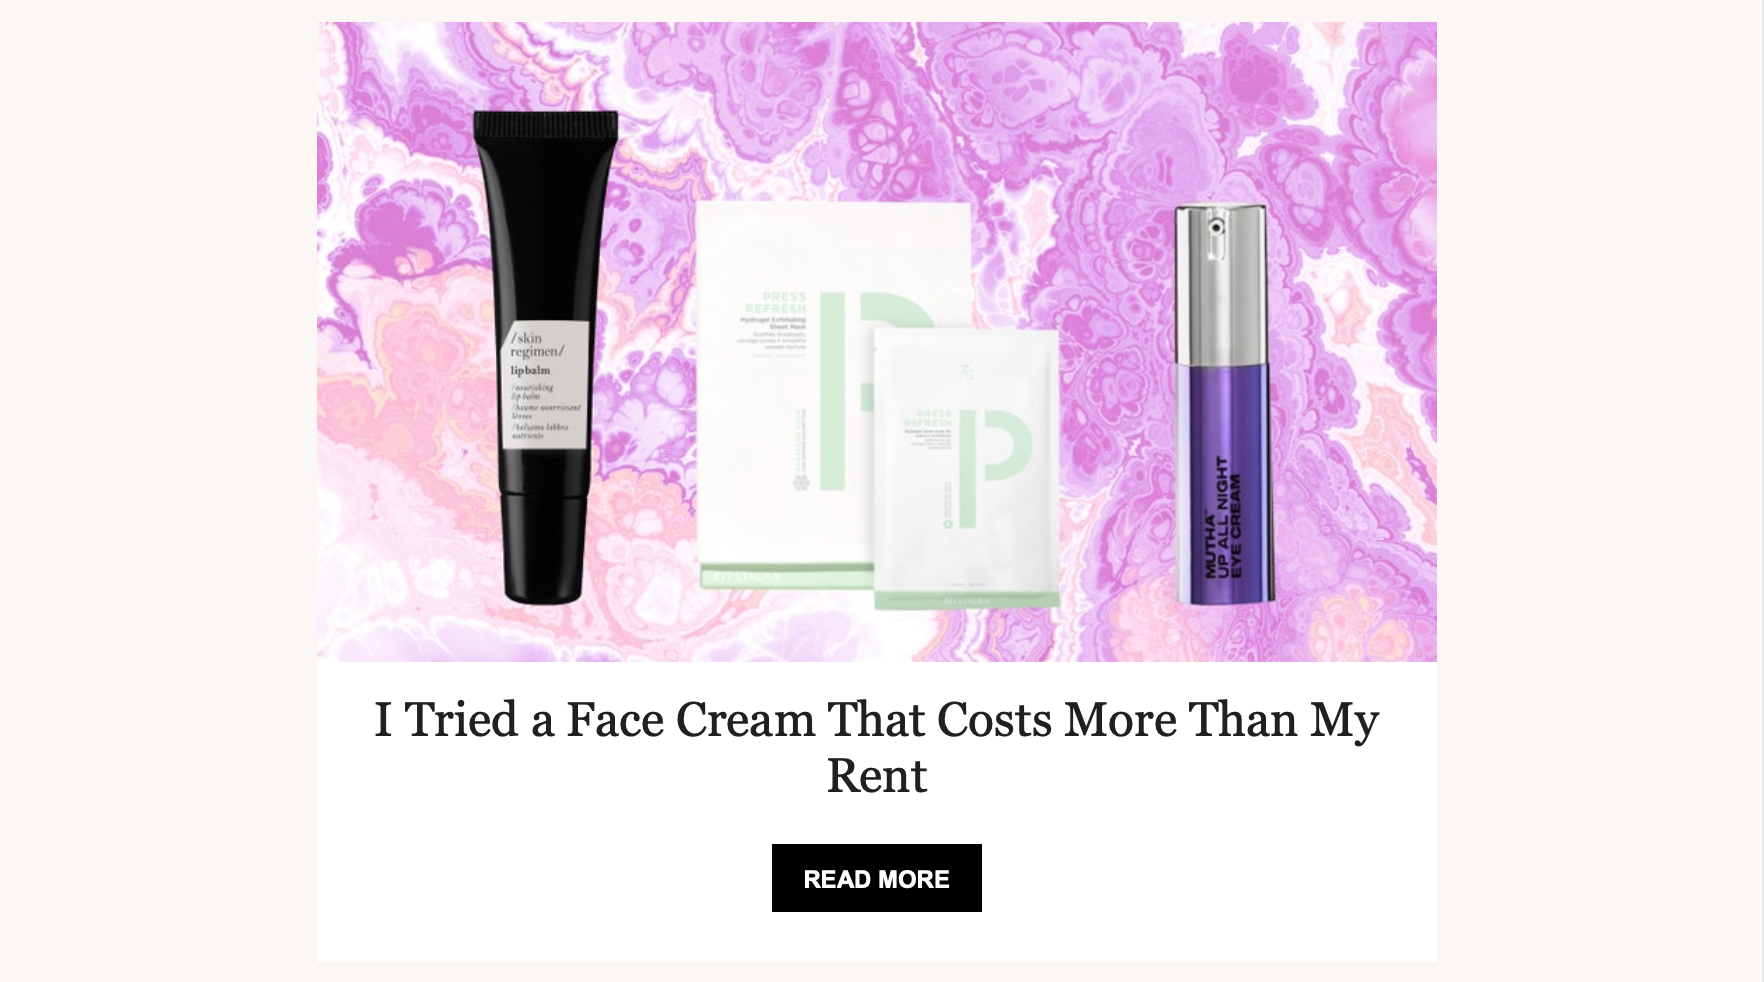 I Tried a Face Cream That Costs More Than My Rent